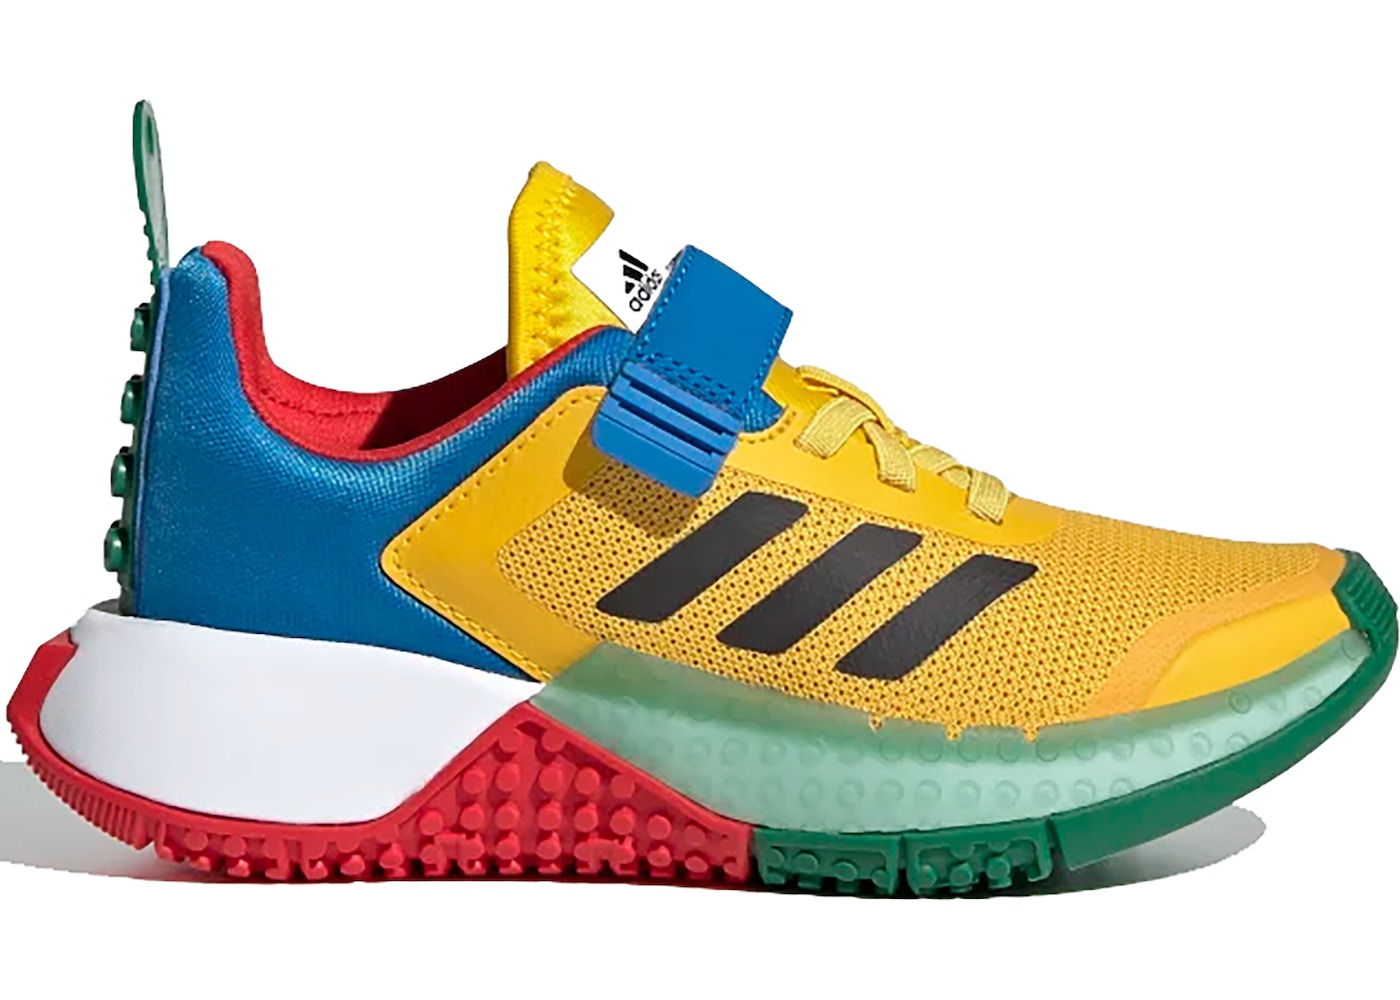 adidas Sport Shoe Lego Yellow (PS) - FY8440